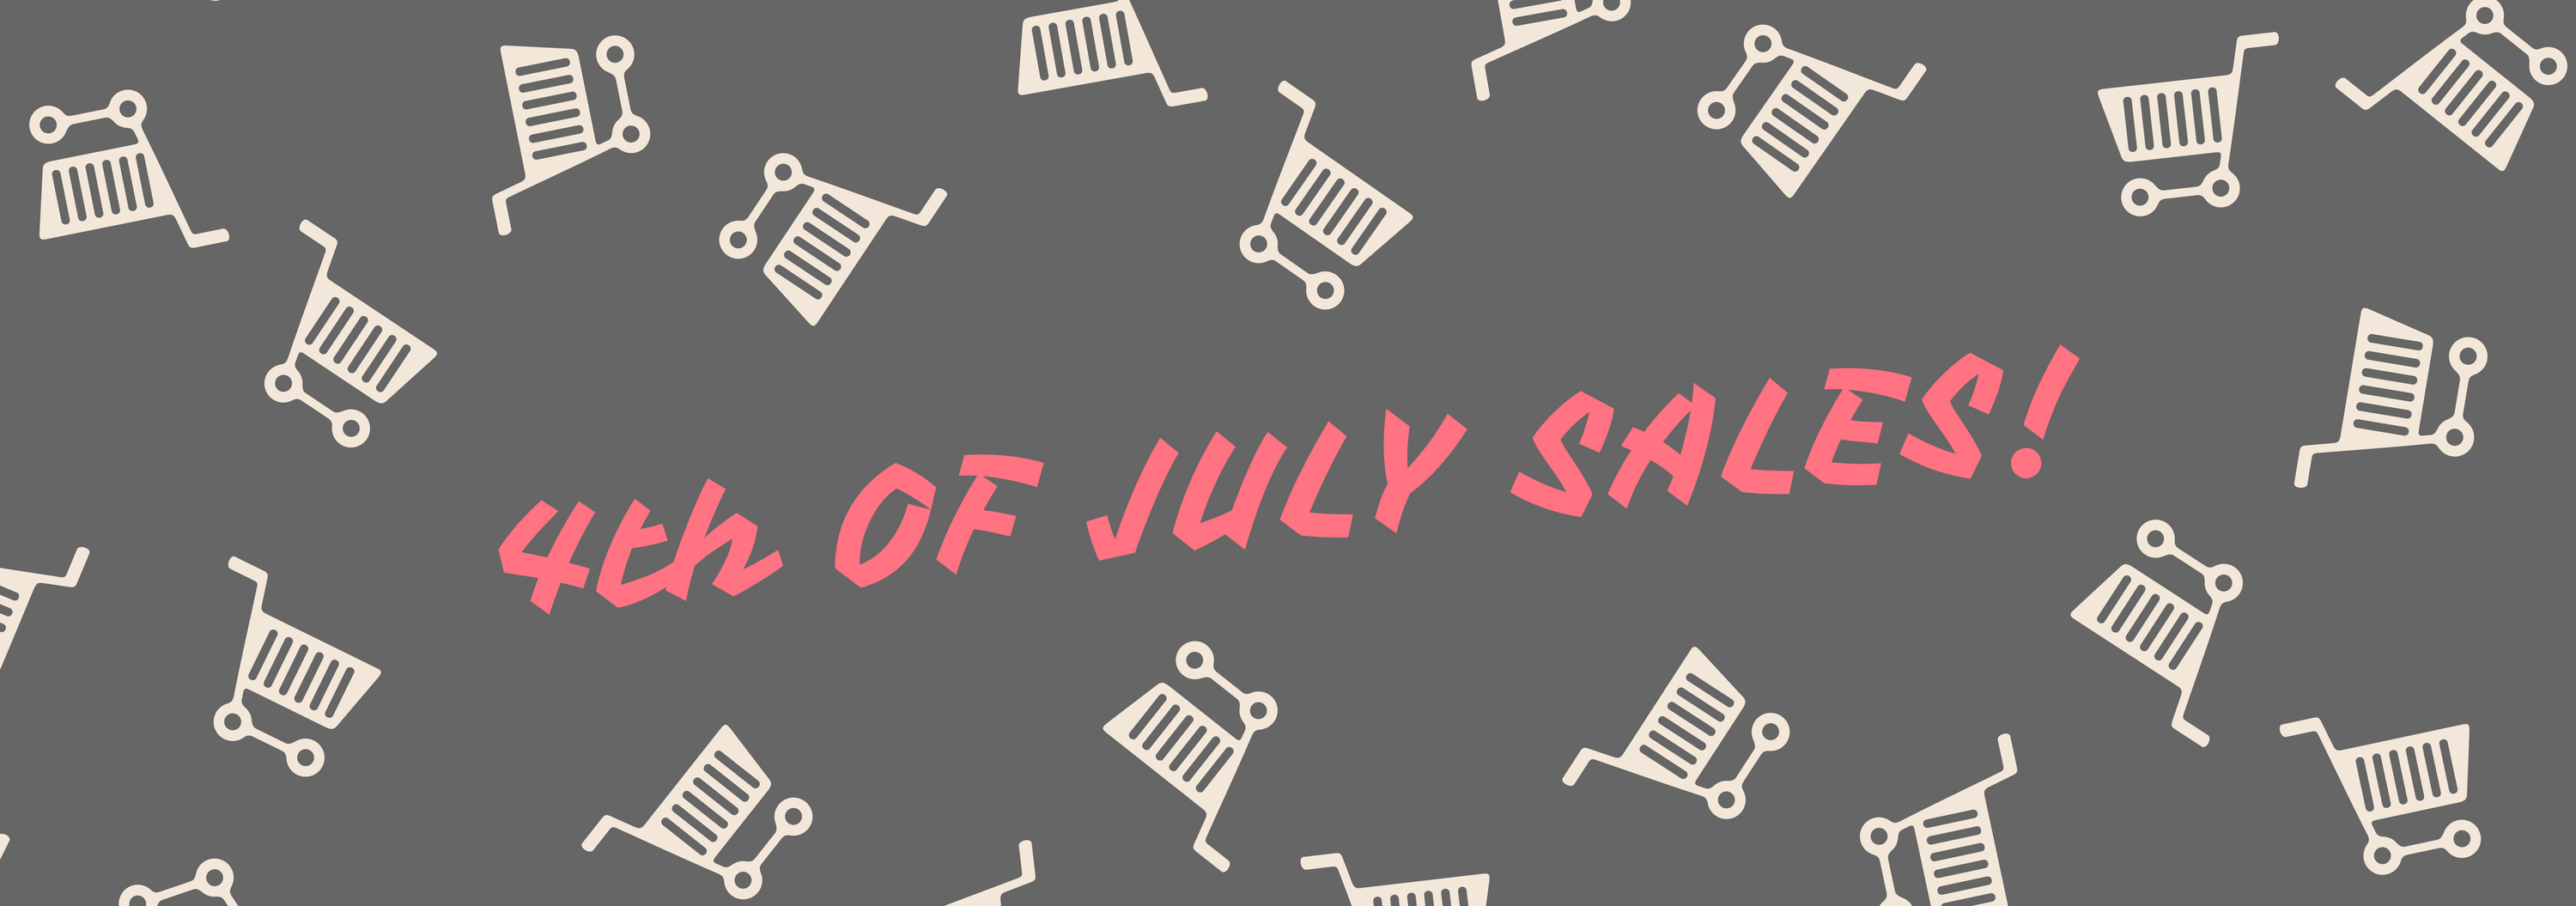 Style-Beacon-Shopping-Guide-Best-4th-fourth-of-july-sales